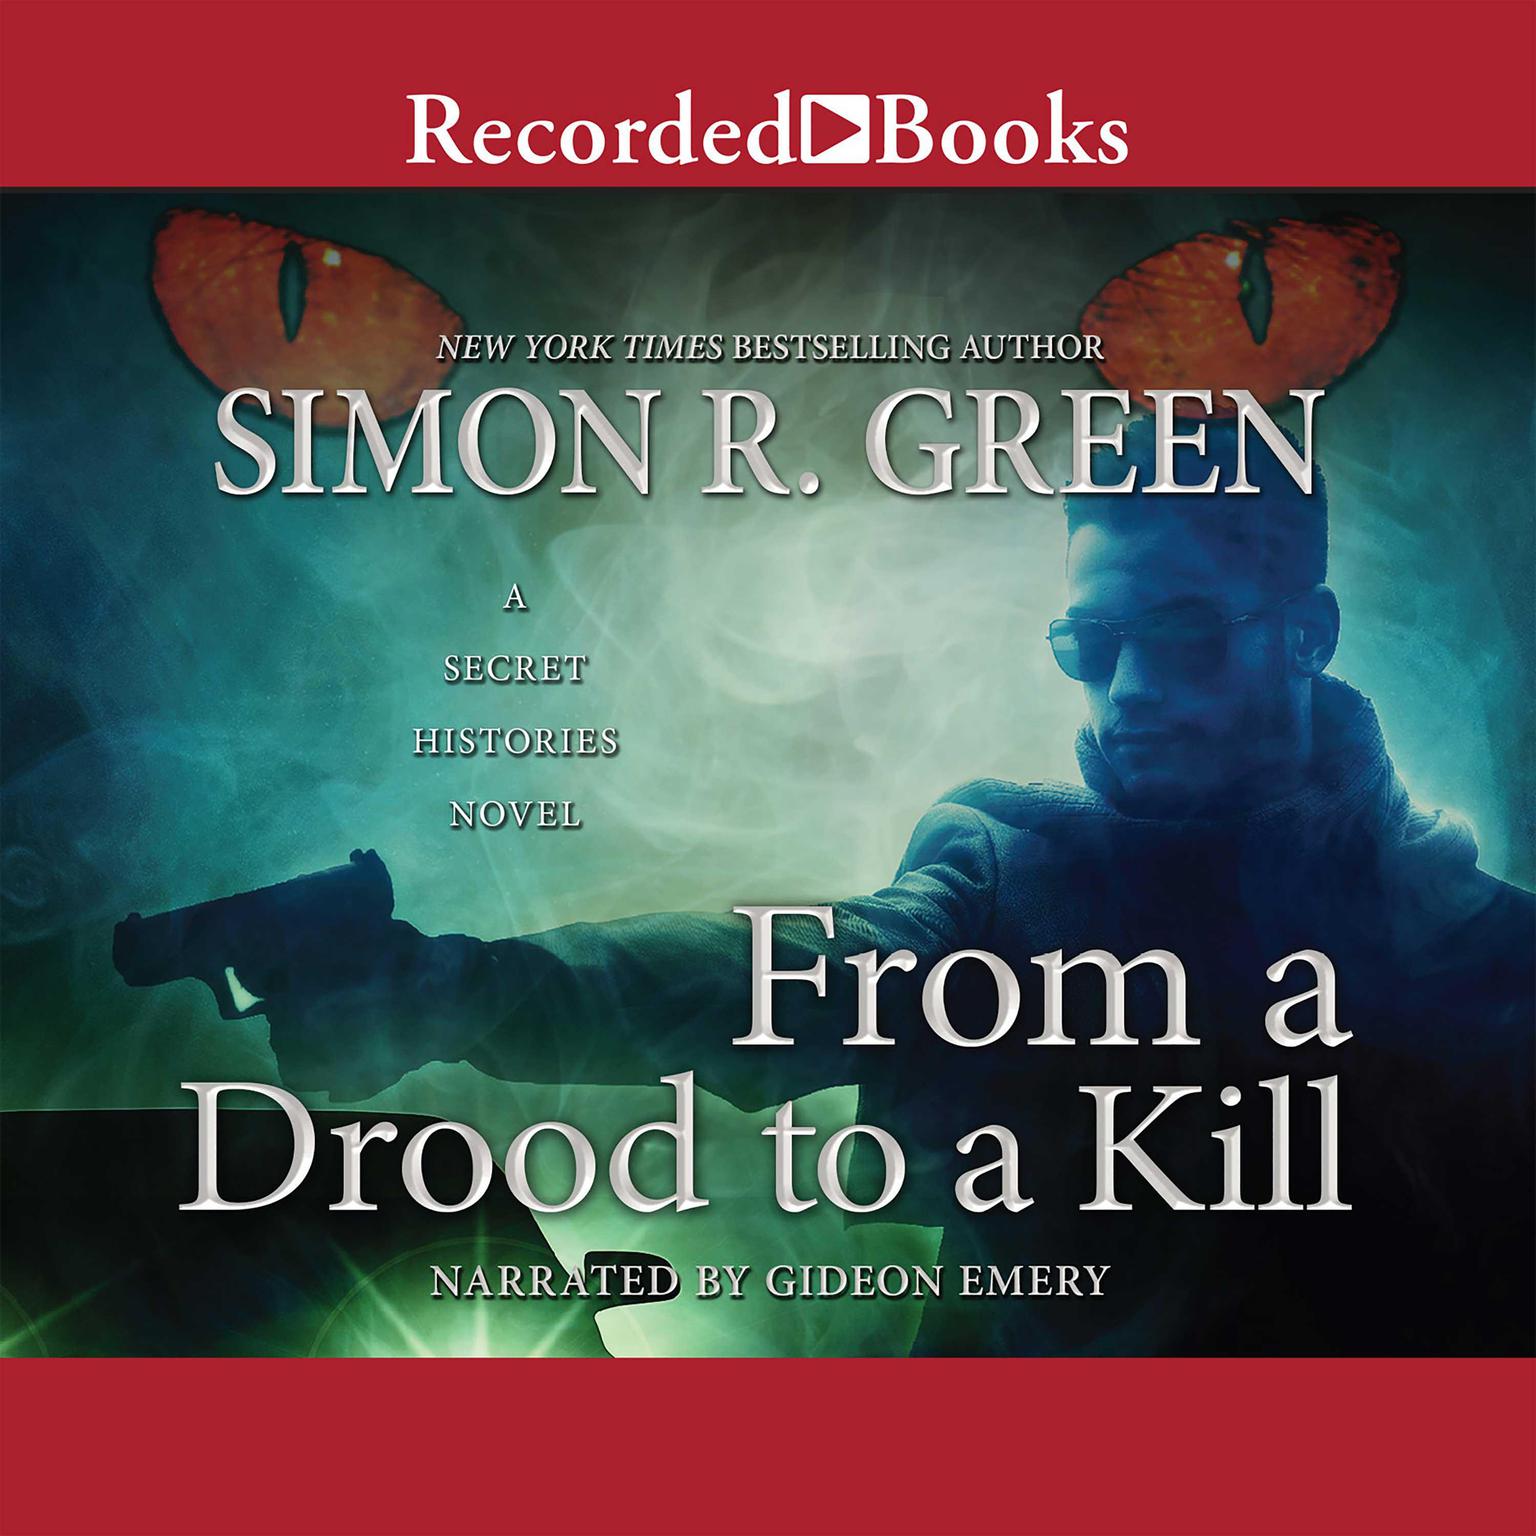 From a Drood to a Kill Audiobook, by Simon R. Green